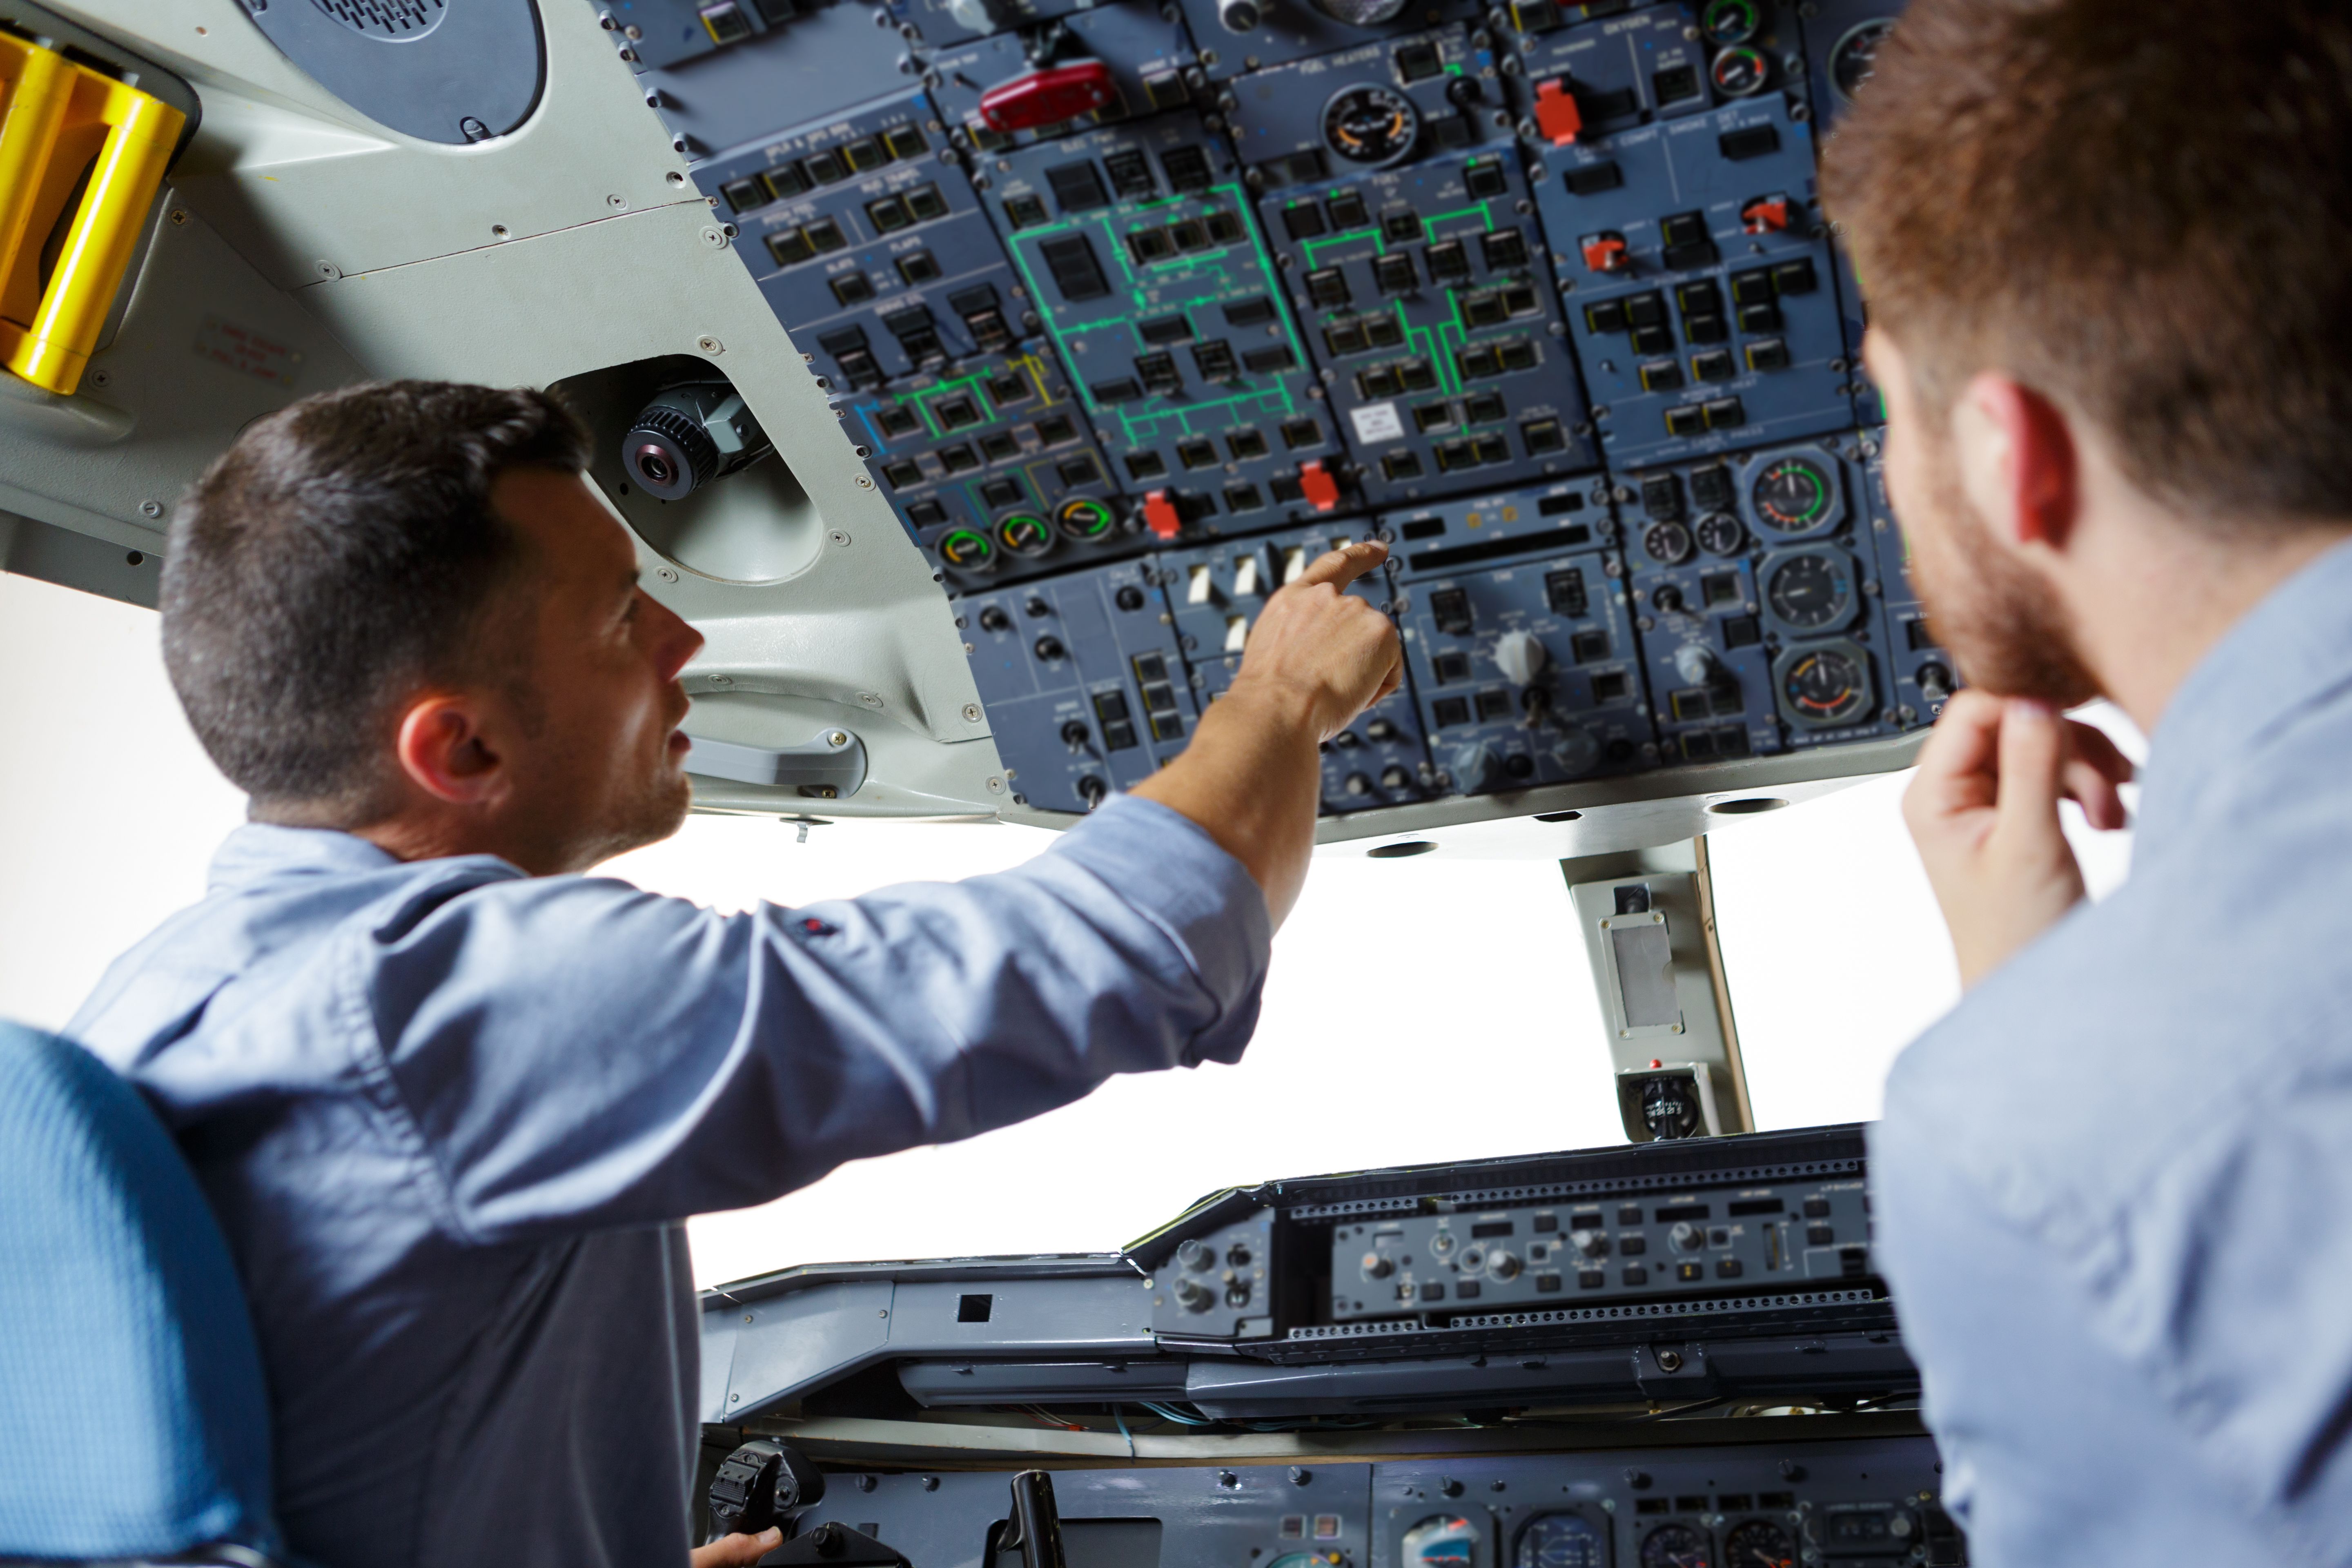 Two pilots inspecting buttons on the overhead panel of an aircraft cockpit